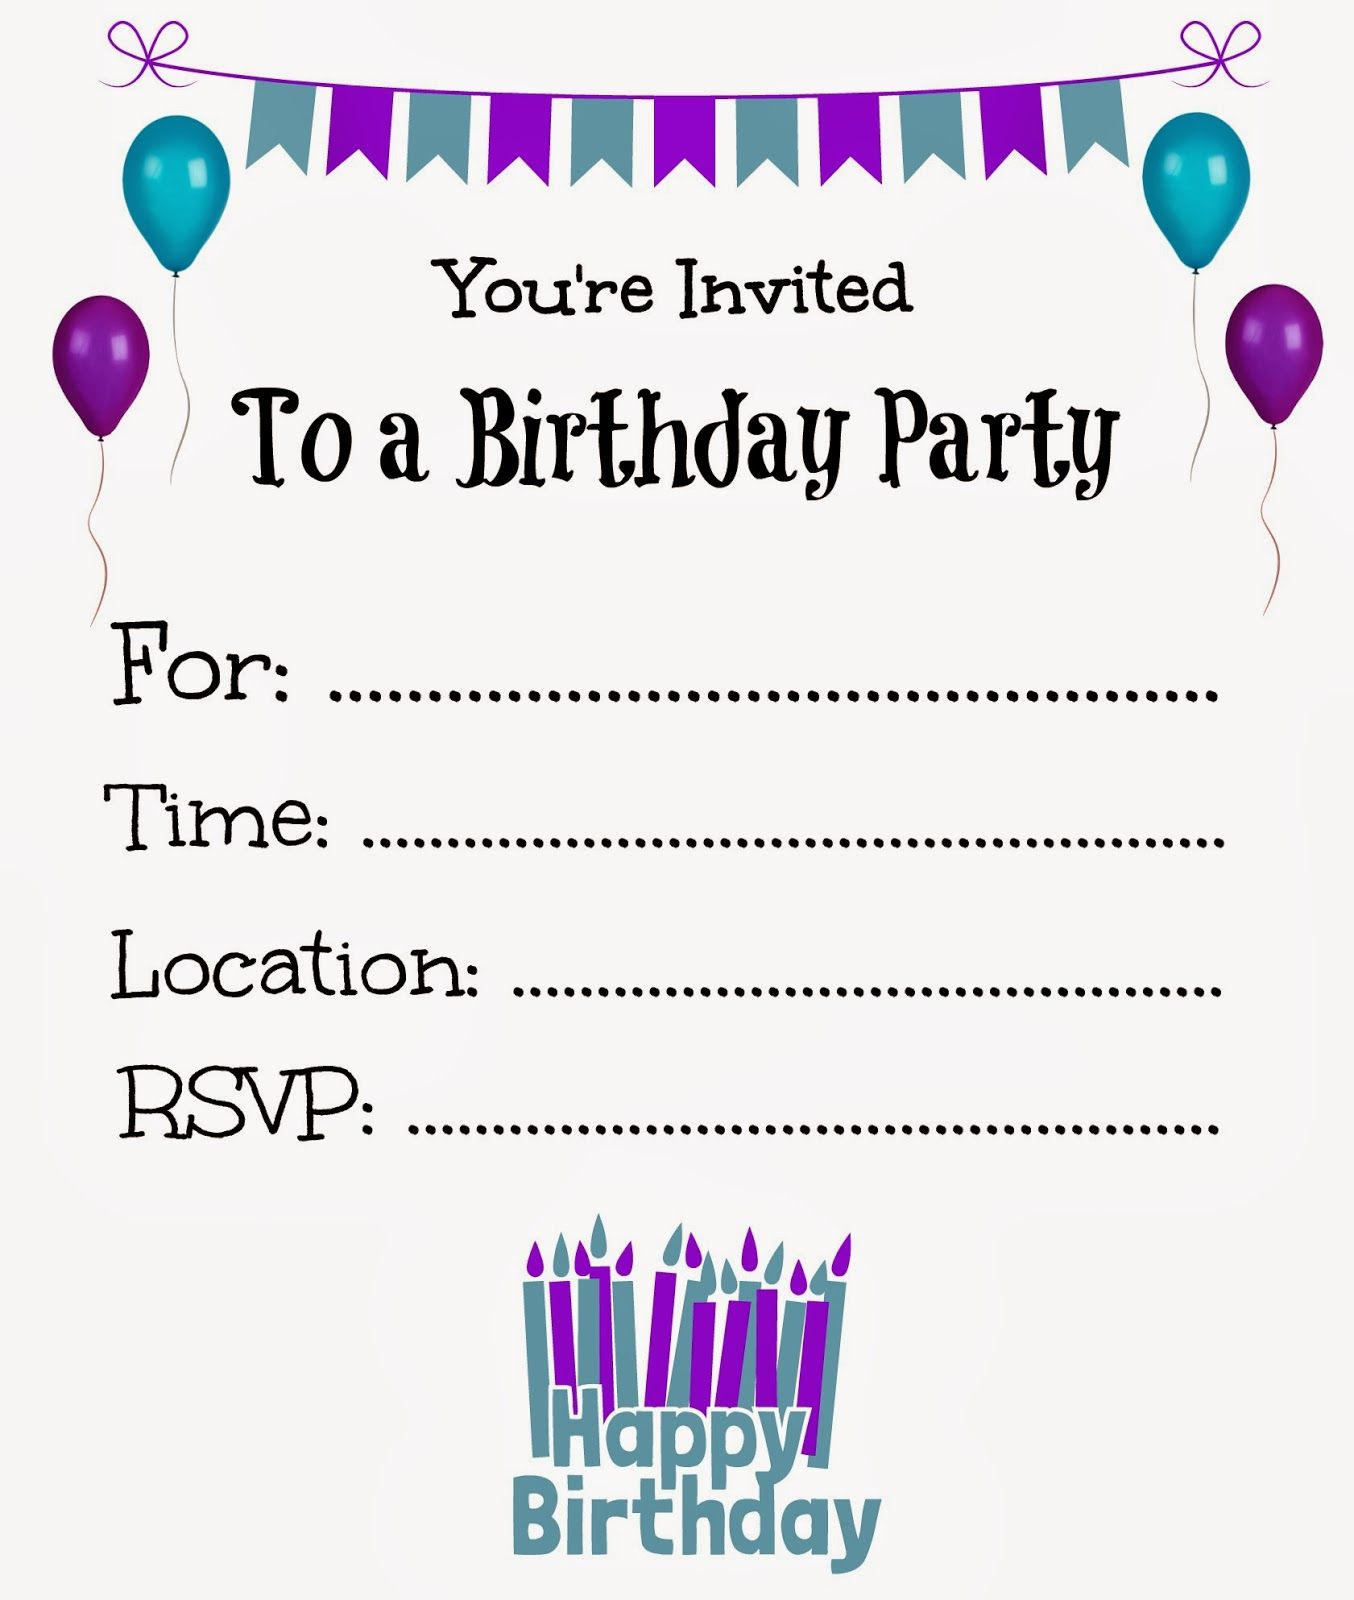 Free Printable Birthday Invitations For Kids #freeprintables - Free Printable Birthday Invitations For Kids